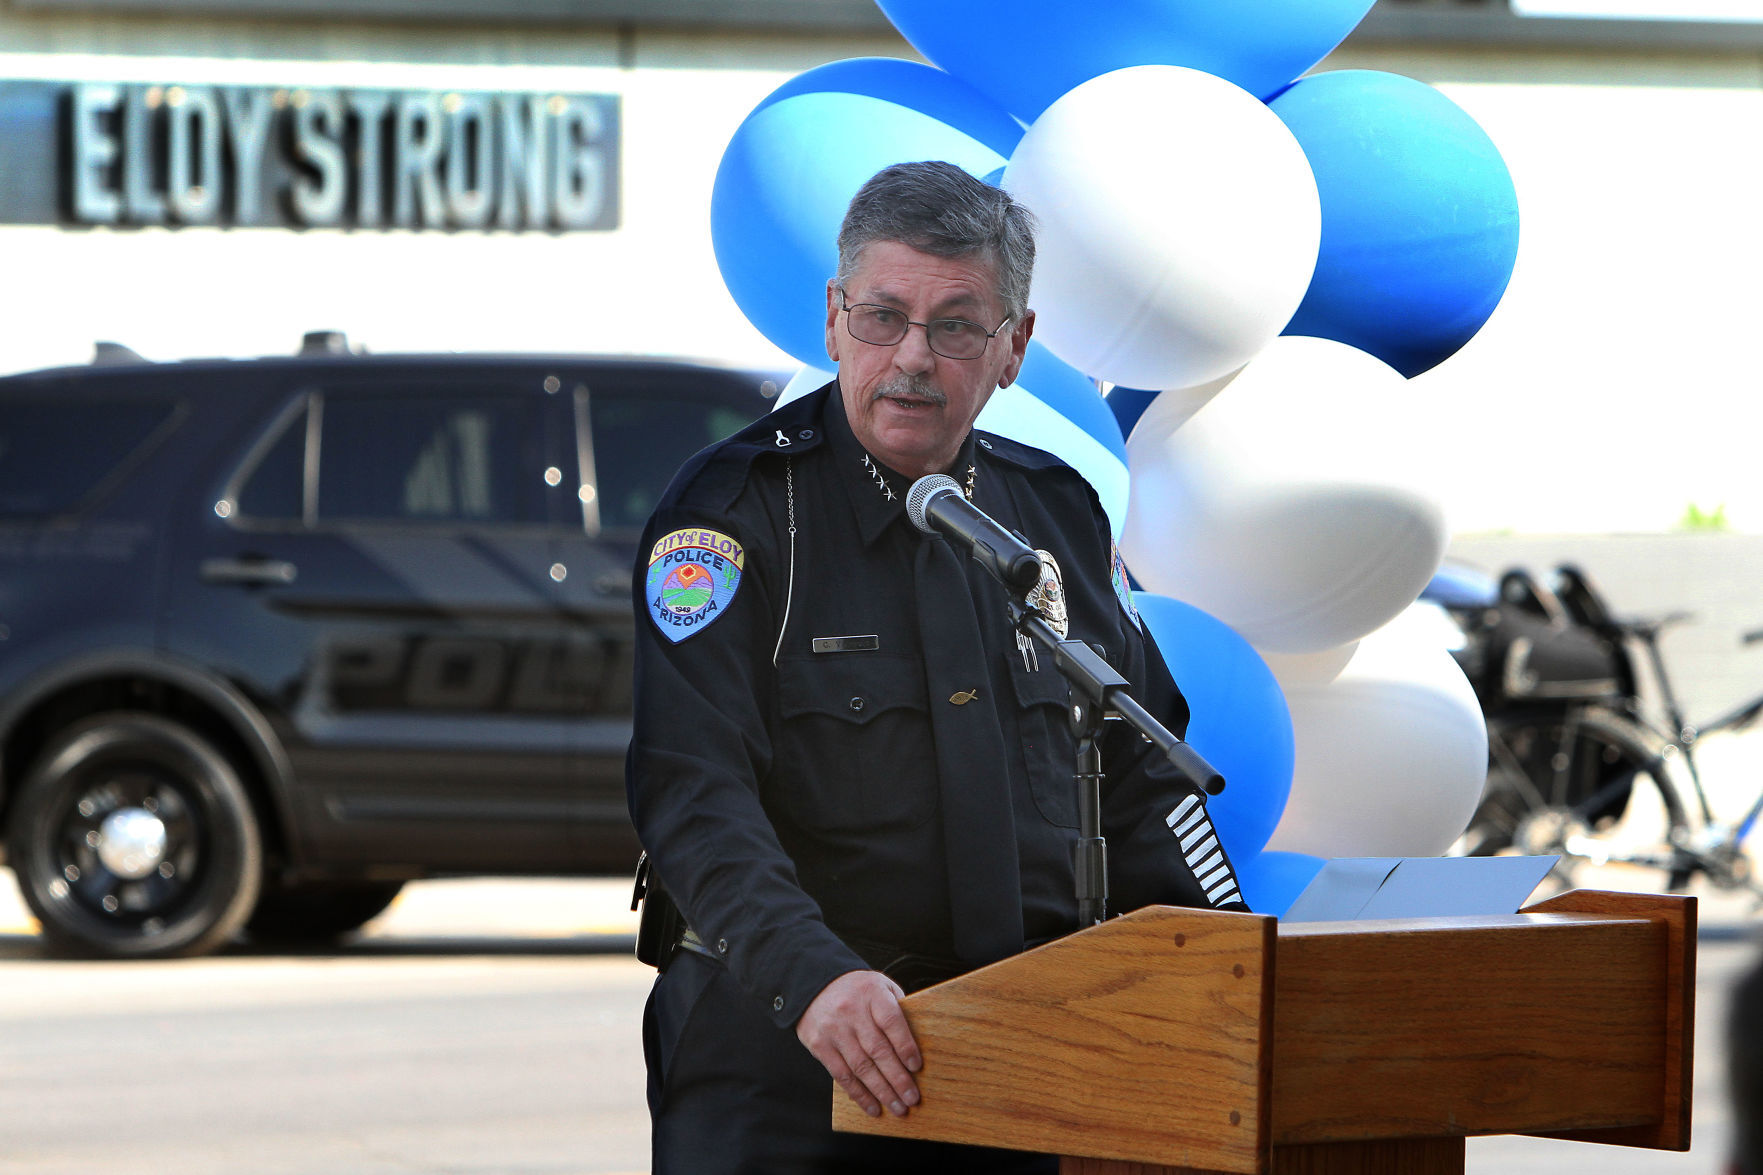 Eloy Police chief reflects on career as retirement approaches